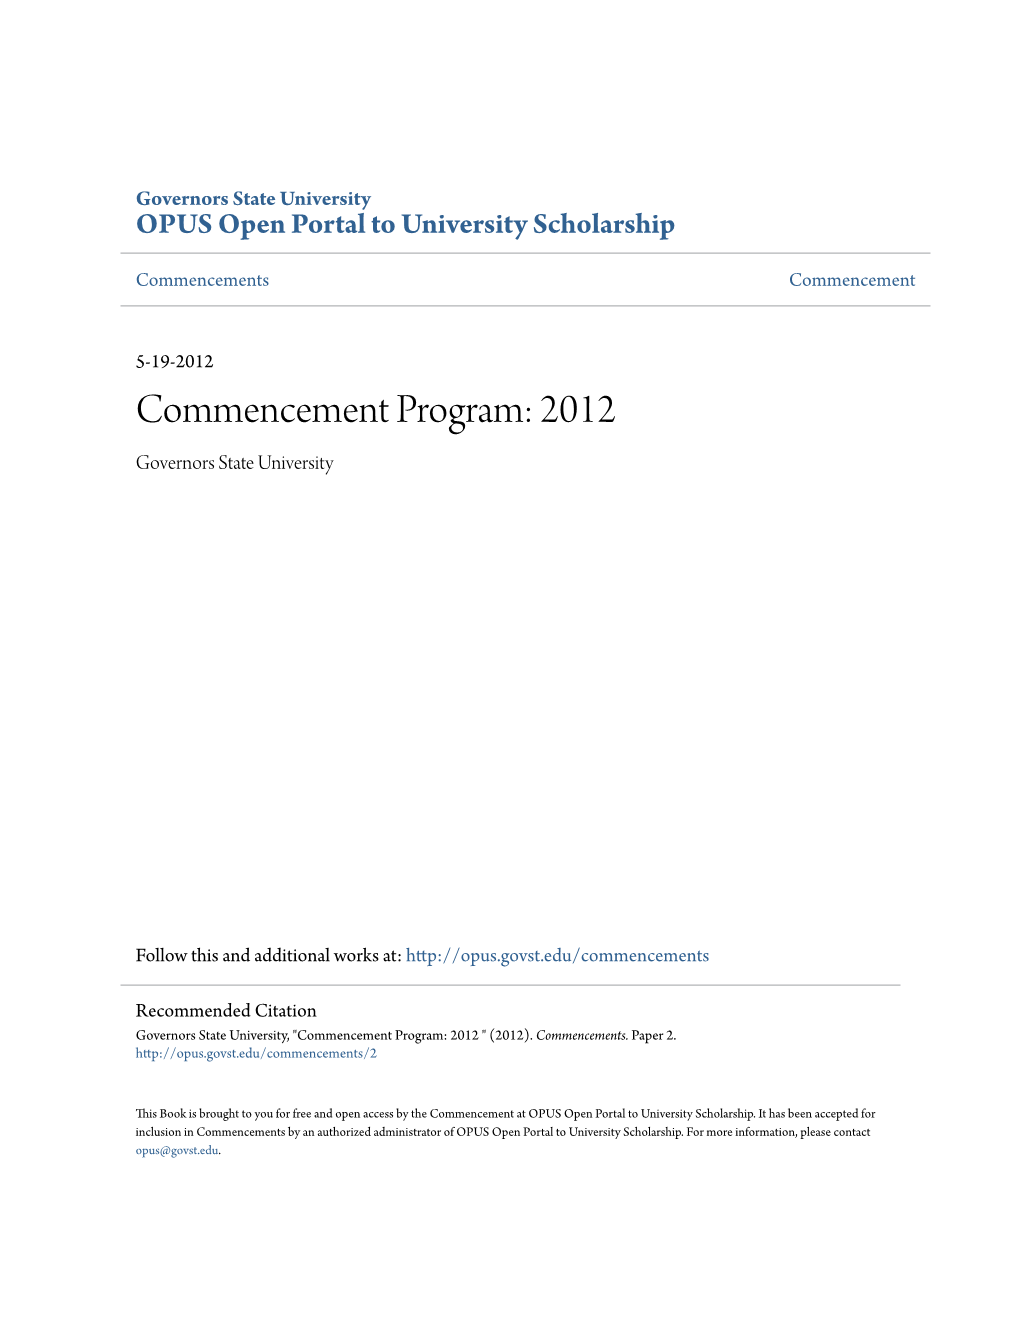 Commencement Program: 2012 Governors State University